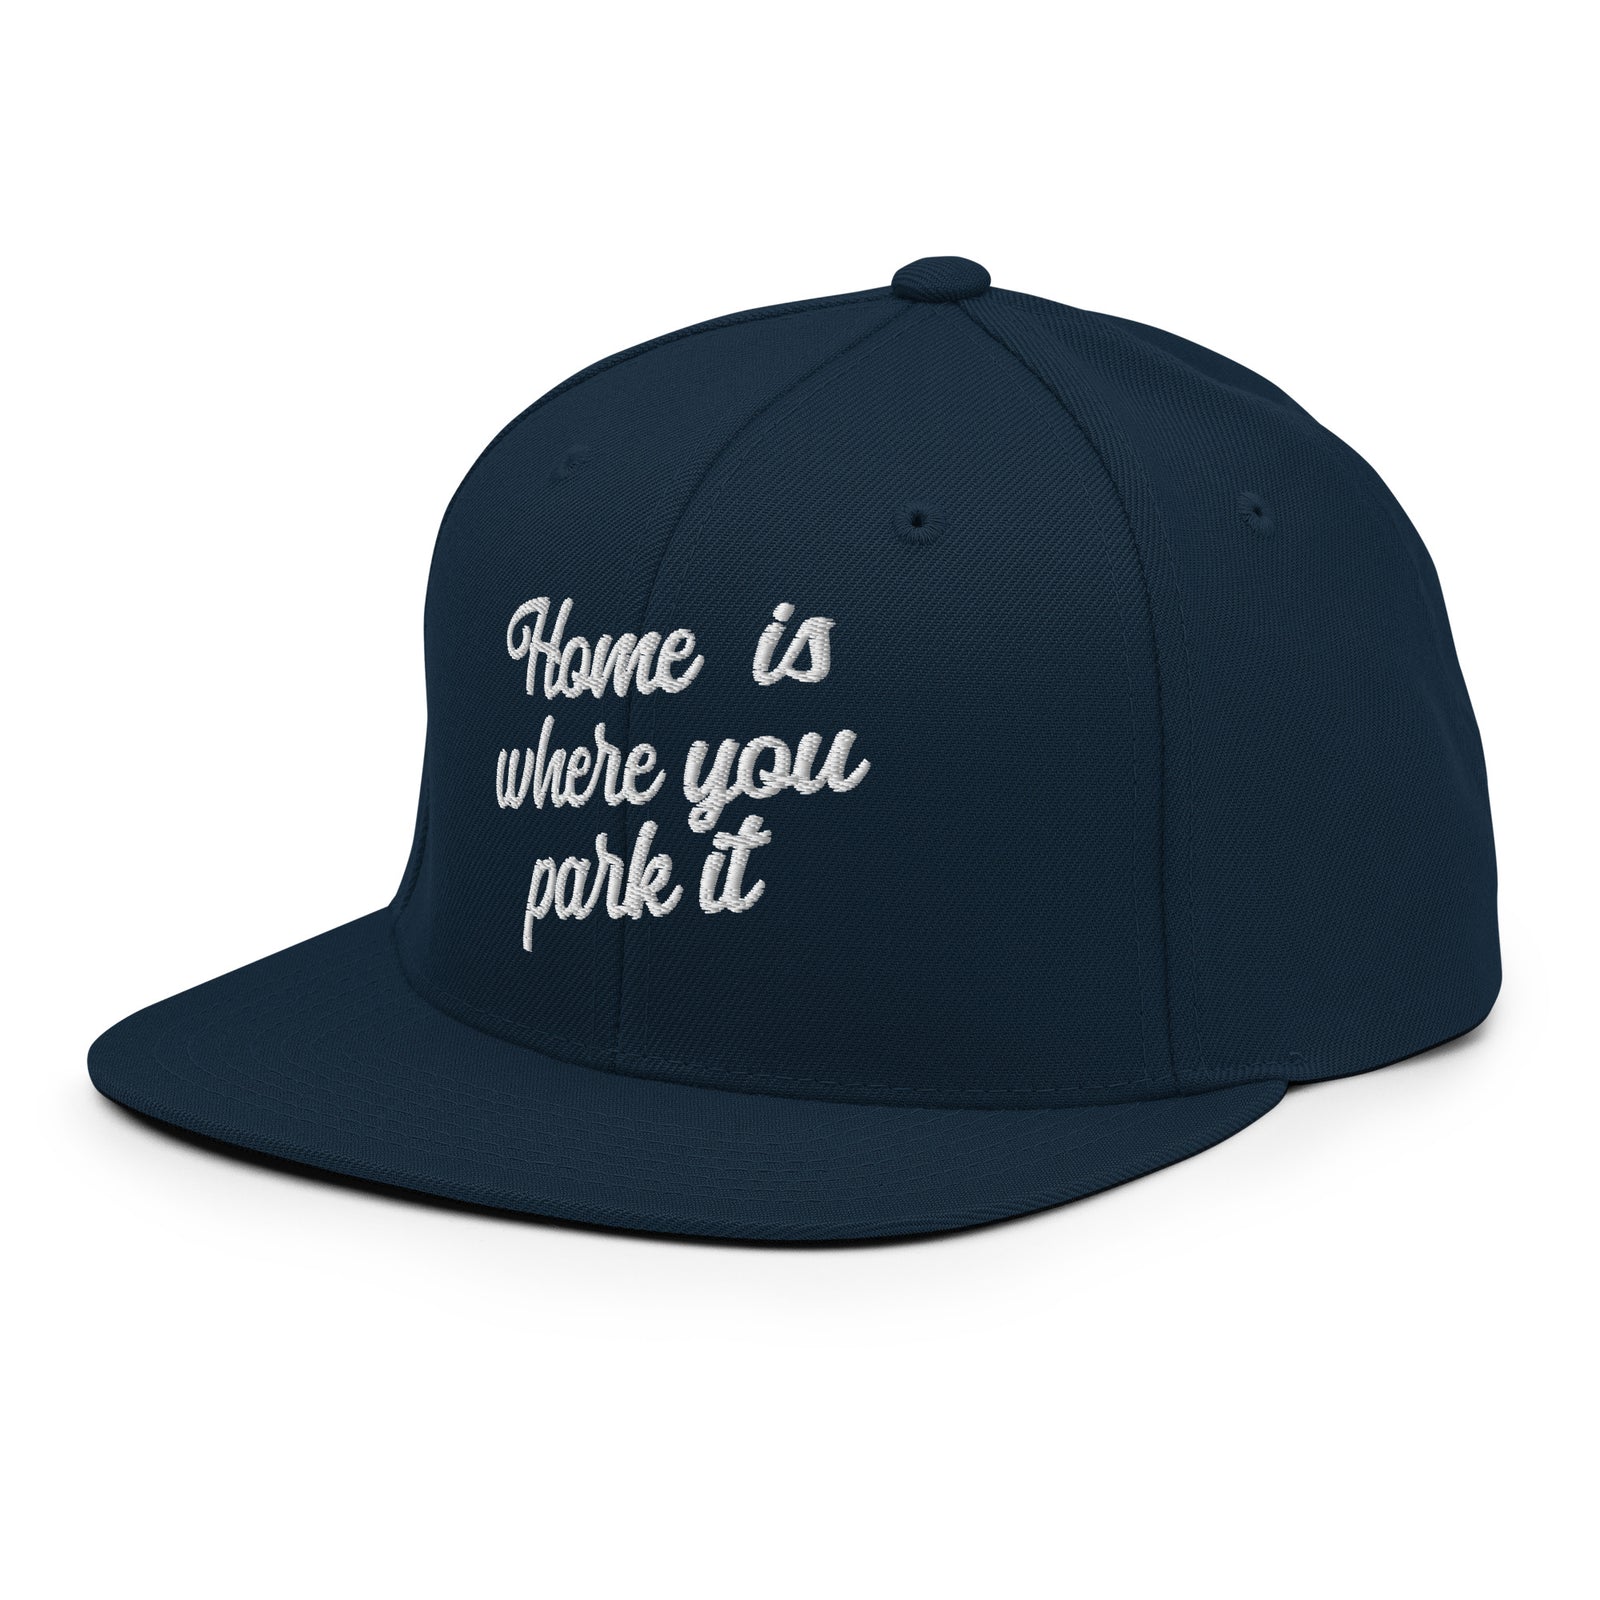 Casquettes Home is where you park it